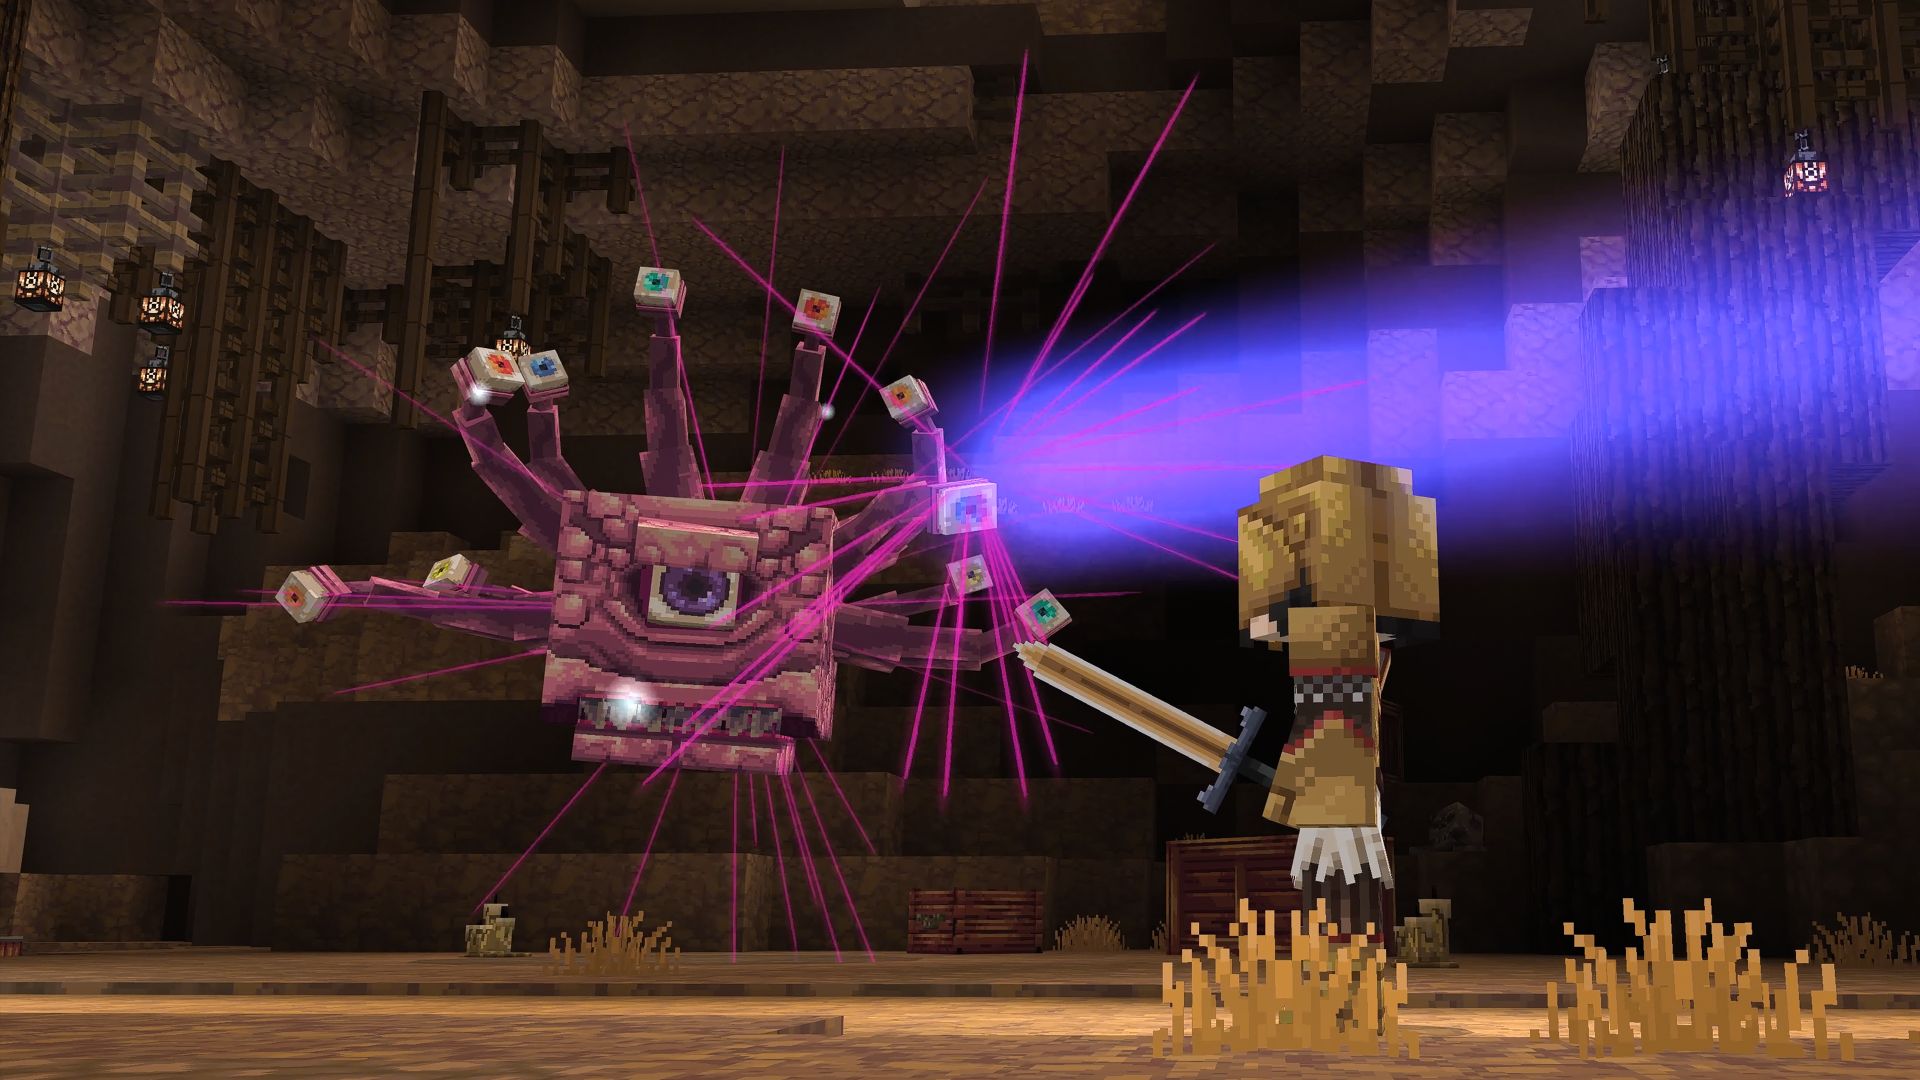 A Beholder shown in the Minecraft x Dungeons & Dragons crossover adventure